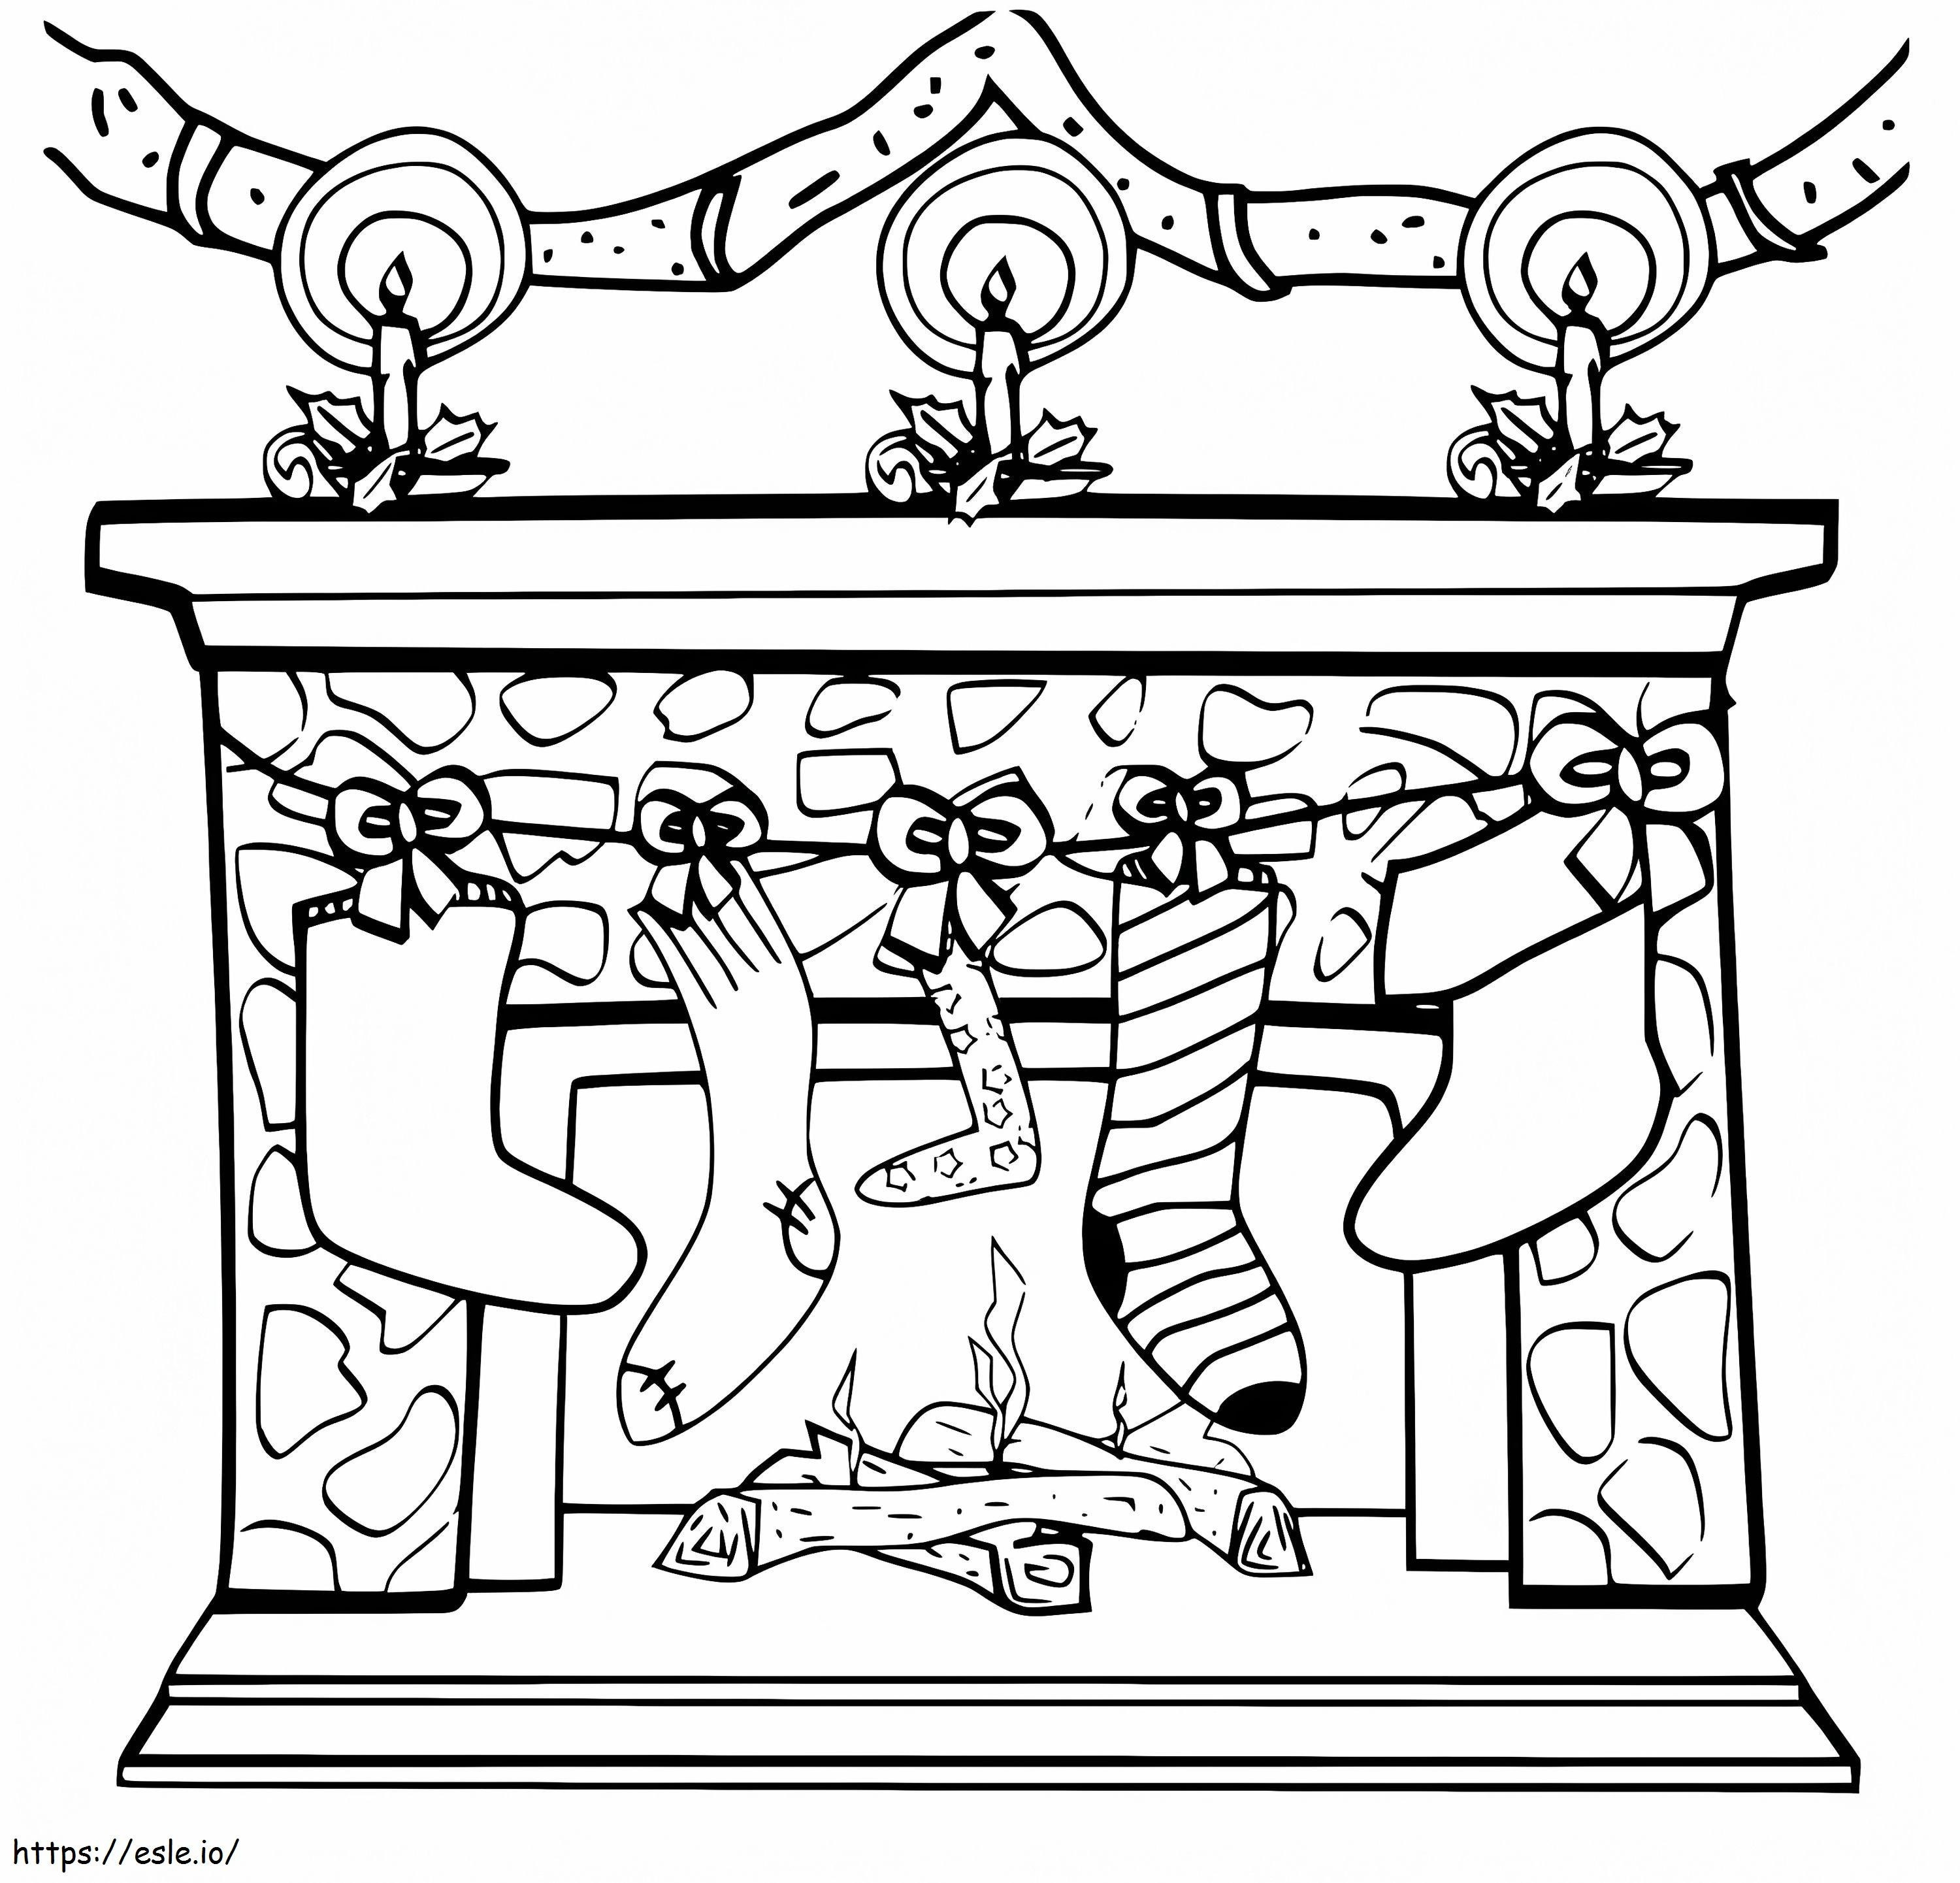 Fireplace 10 coloring page